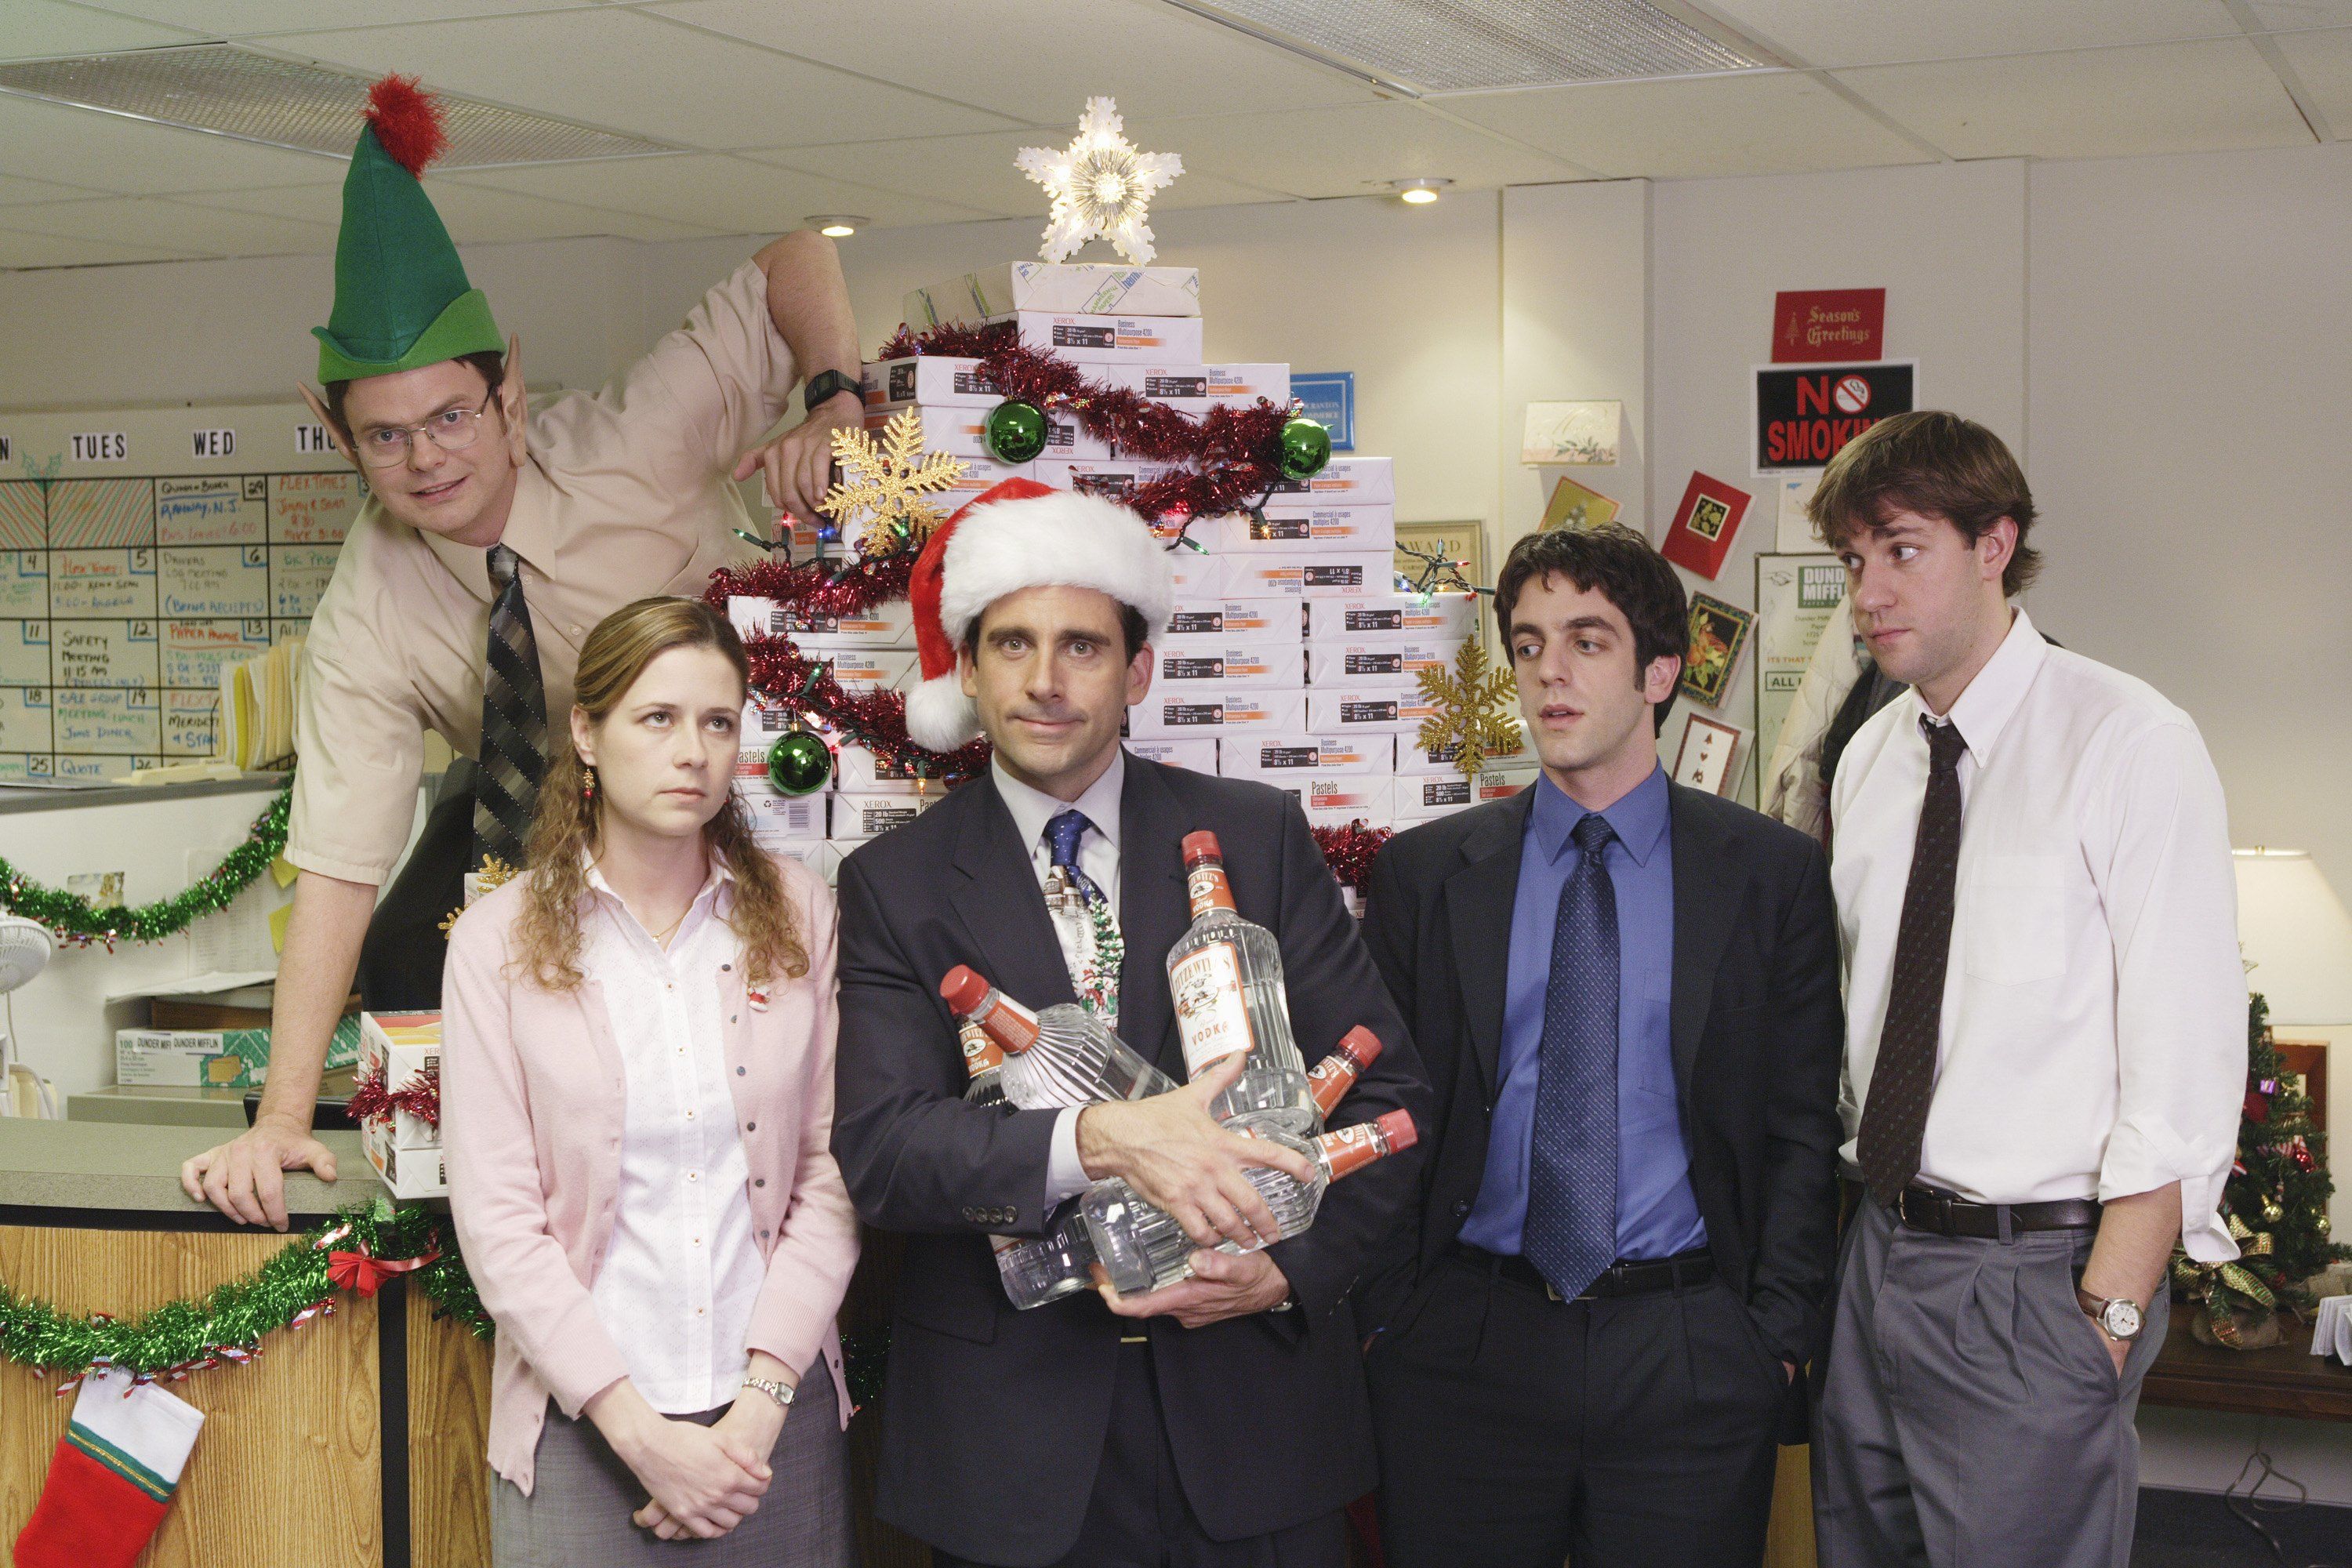 The Office' Christmas Episodes on Netflix, Ranked From Worst to Best